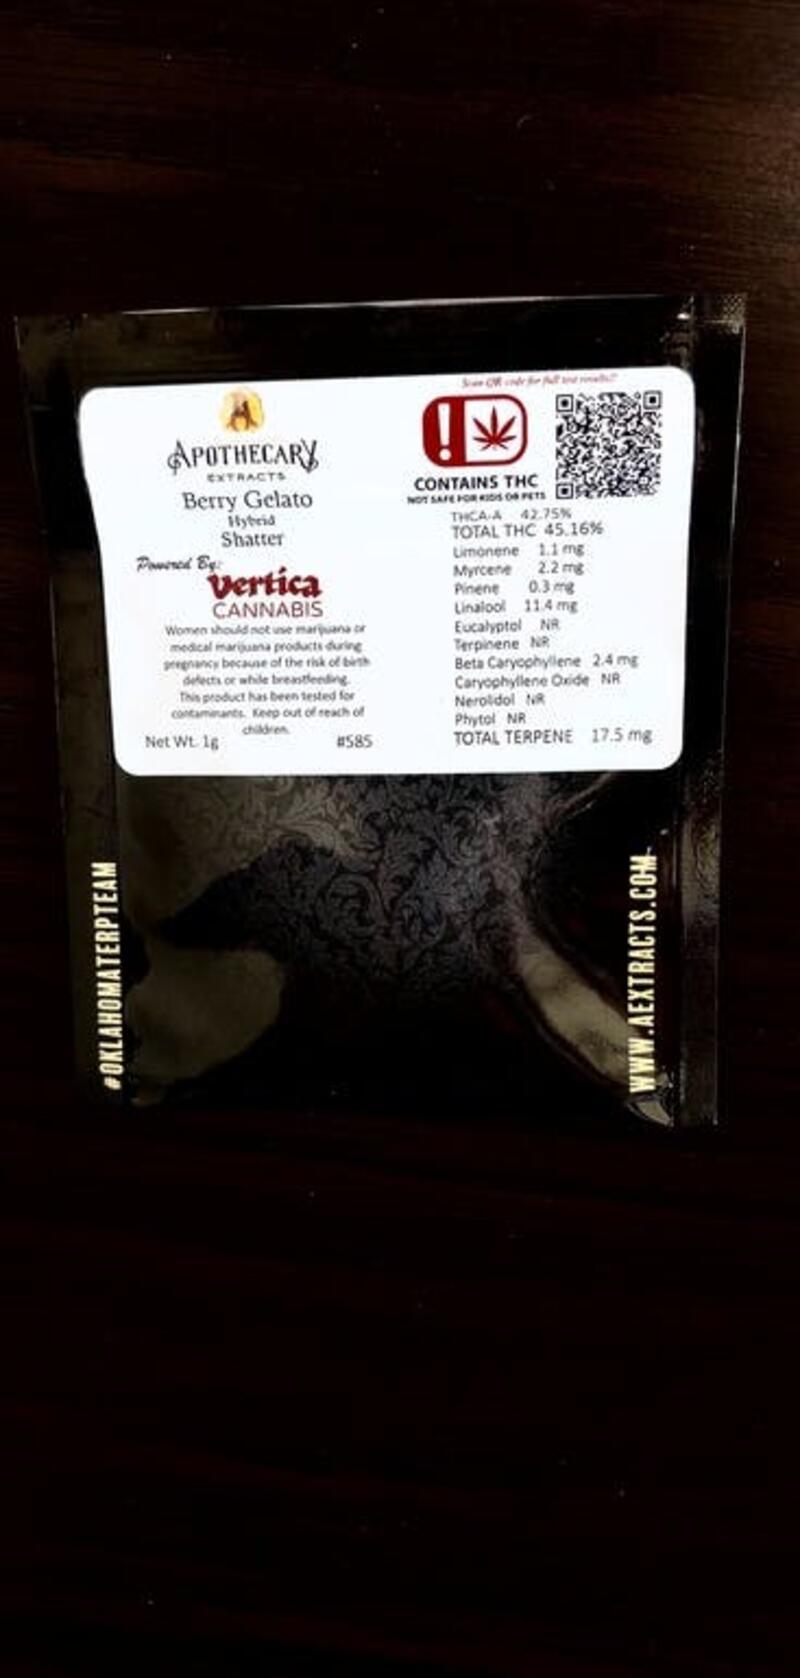 Apothecary Extracts - Berry Gelato 1g Shatter 5/$100